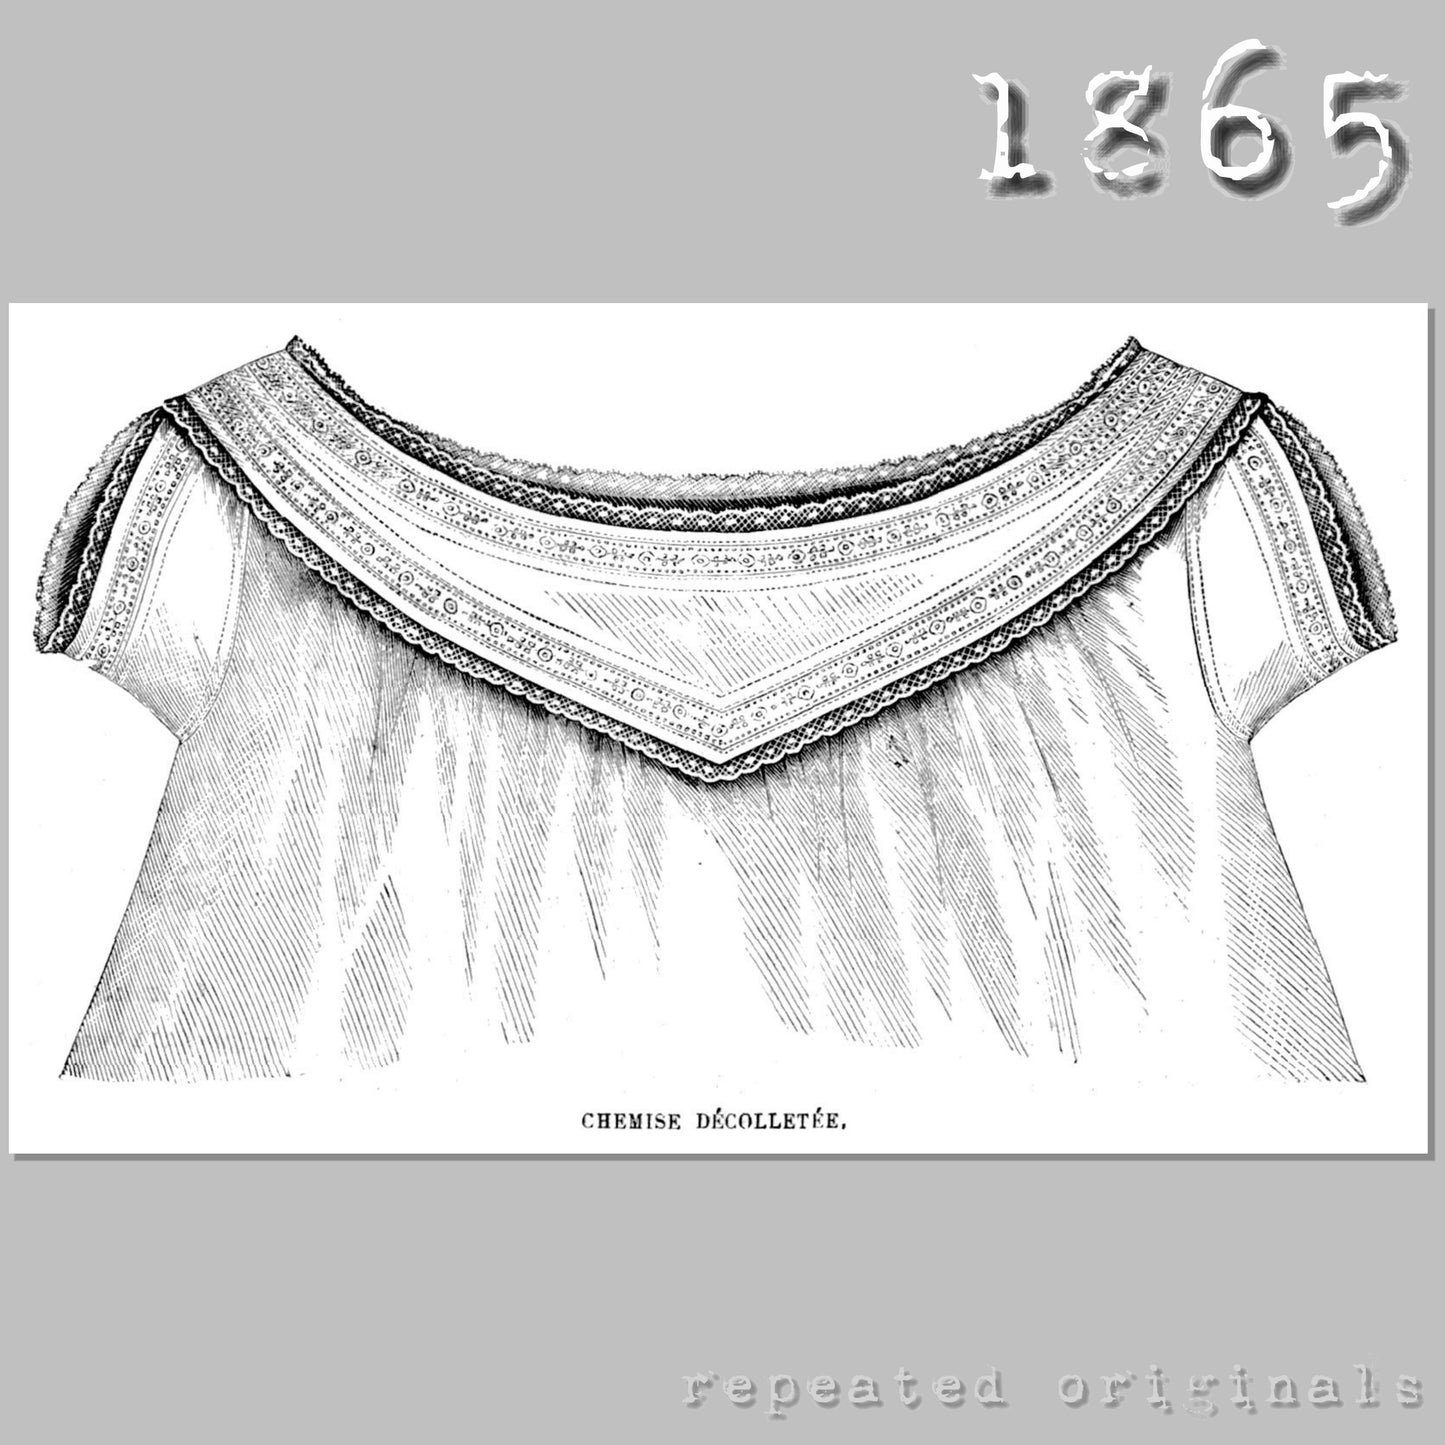 1865 Chemise (Lapel covers top of corset) Sewing Pattern - INSTANT DOWNLOAD PDF